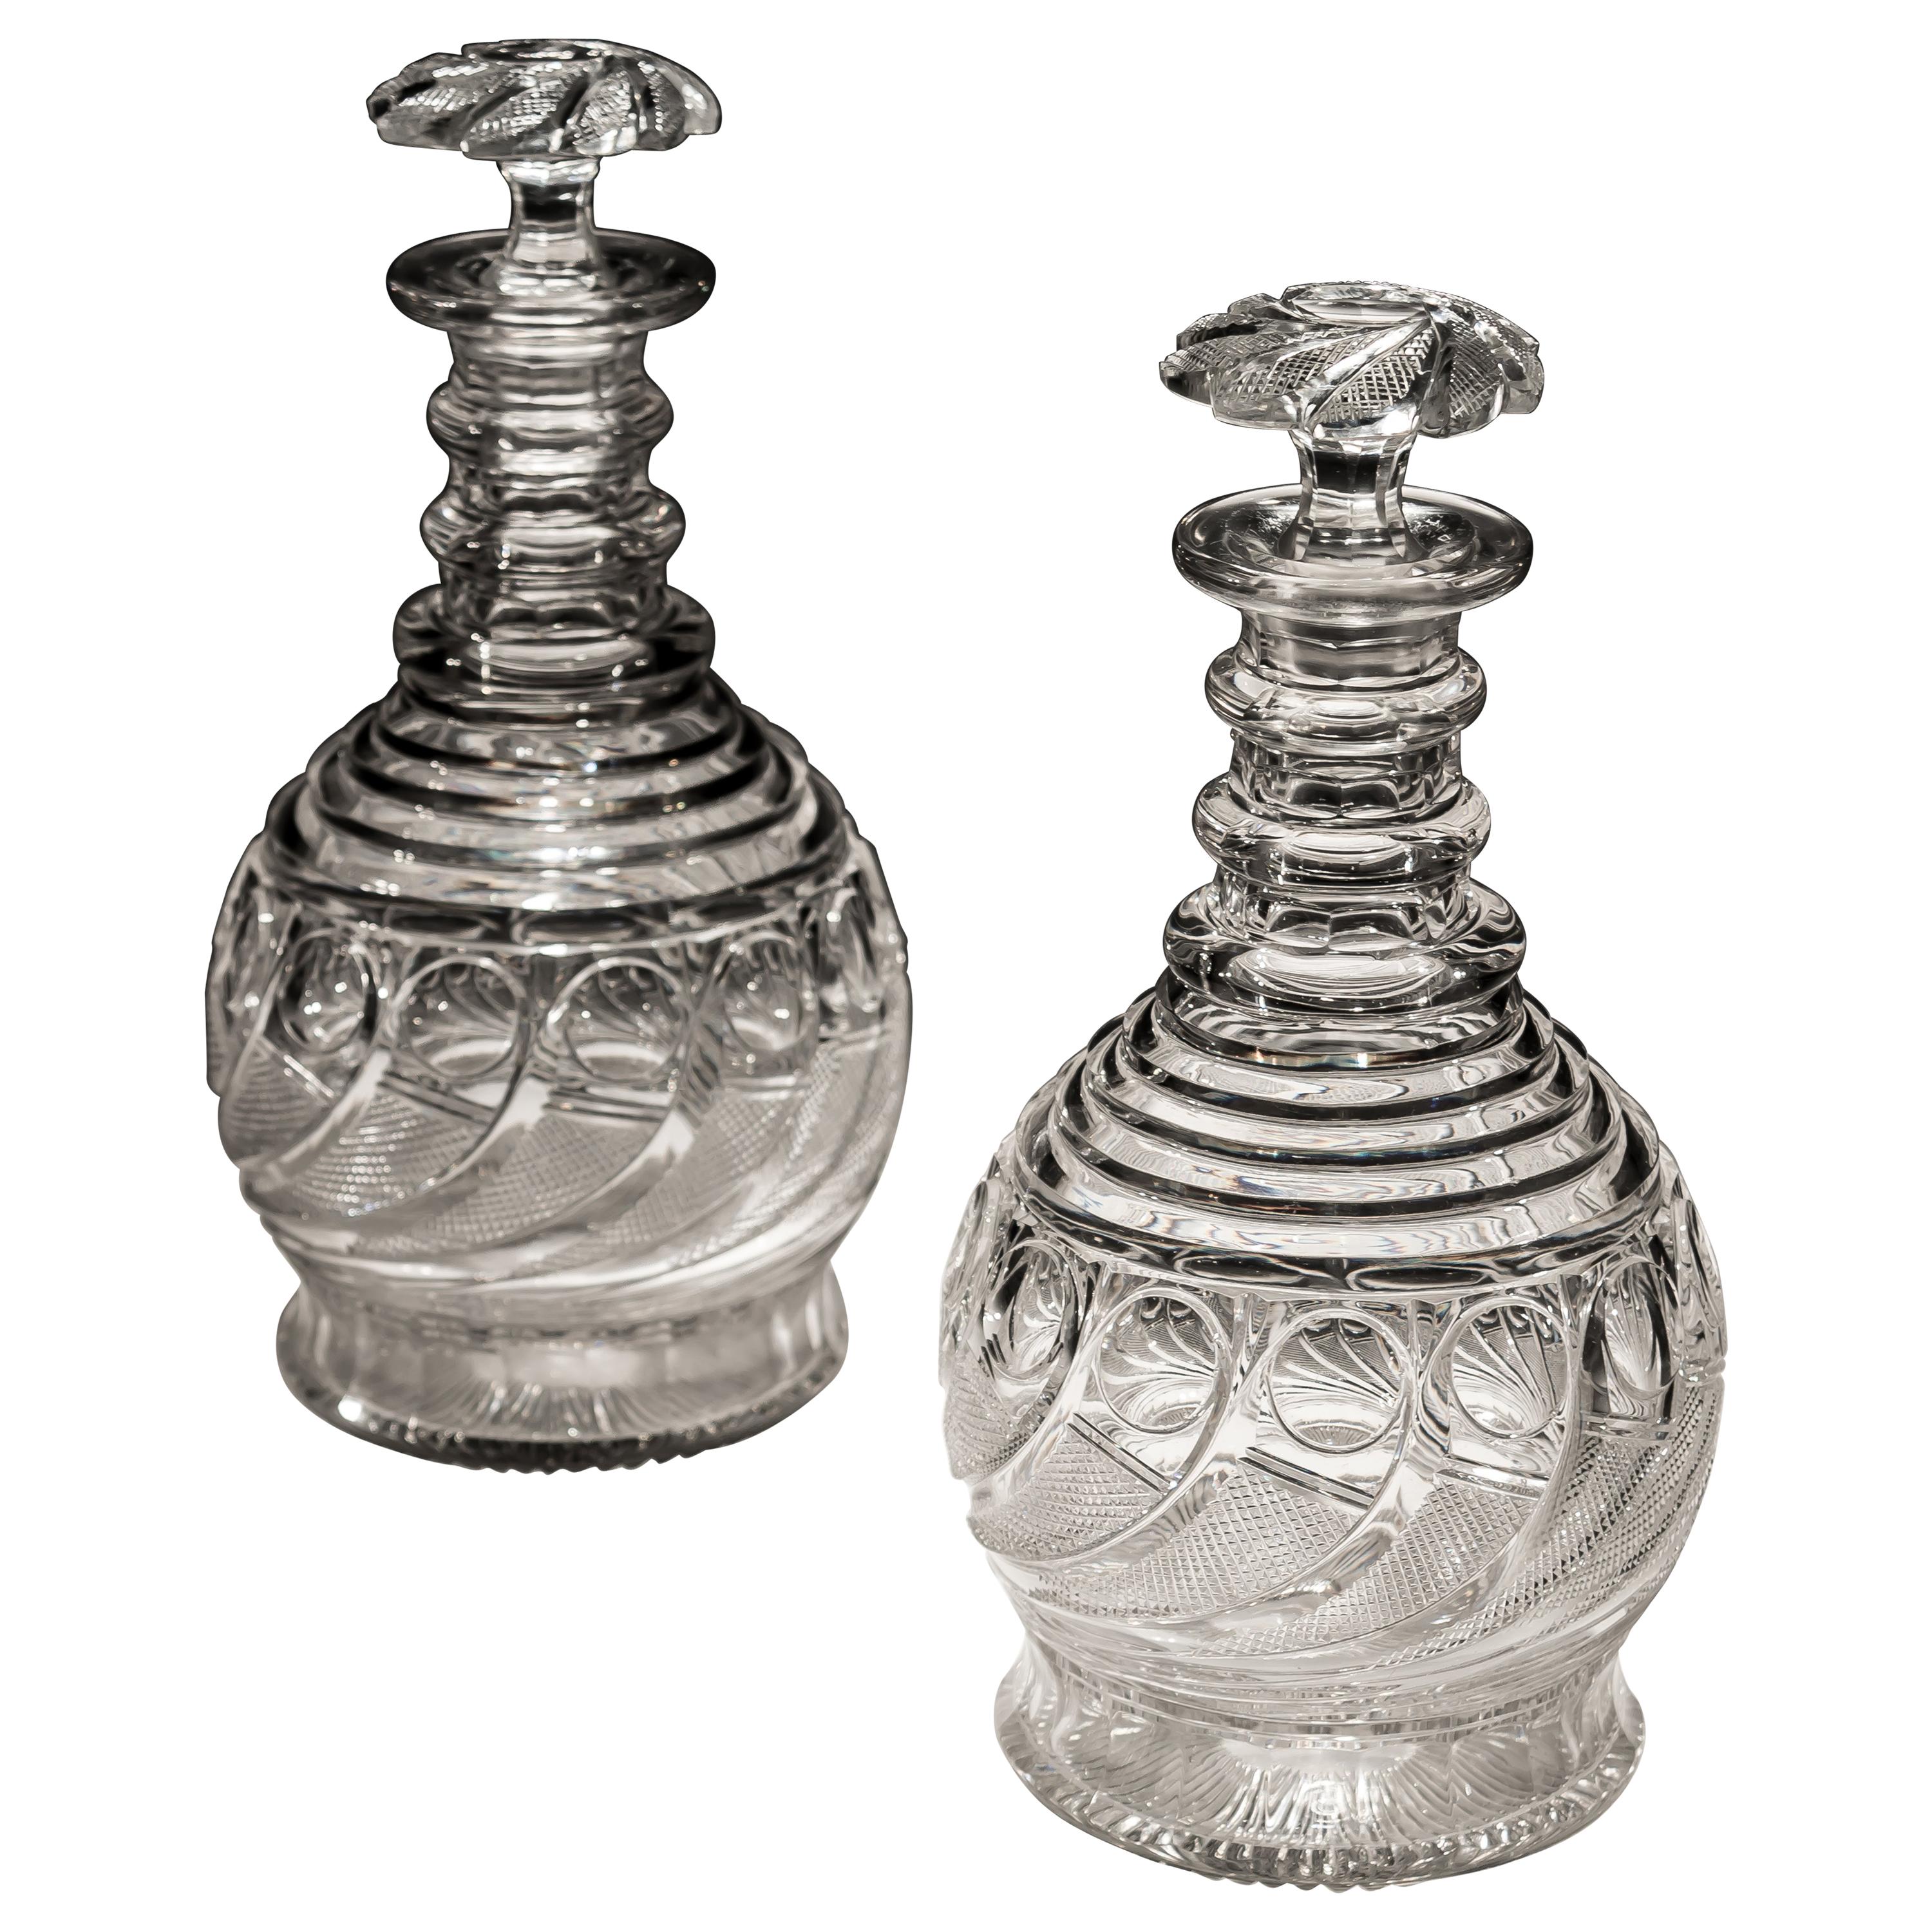 Exceptional Pair of Swirl Cut Regency Decanters with Swirl Cut Stoppers